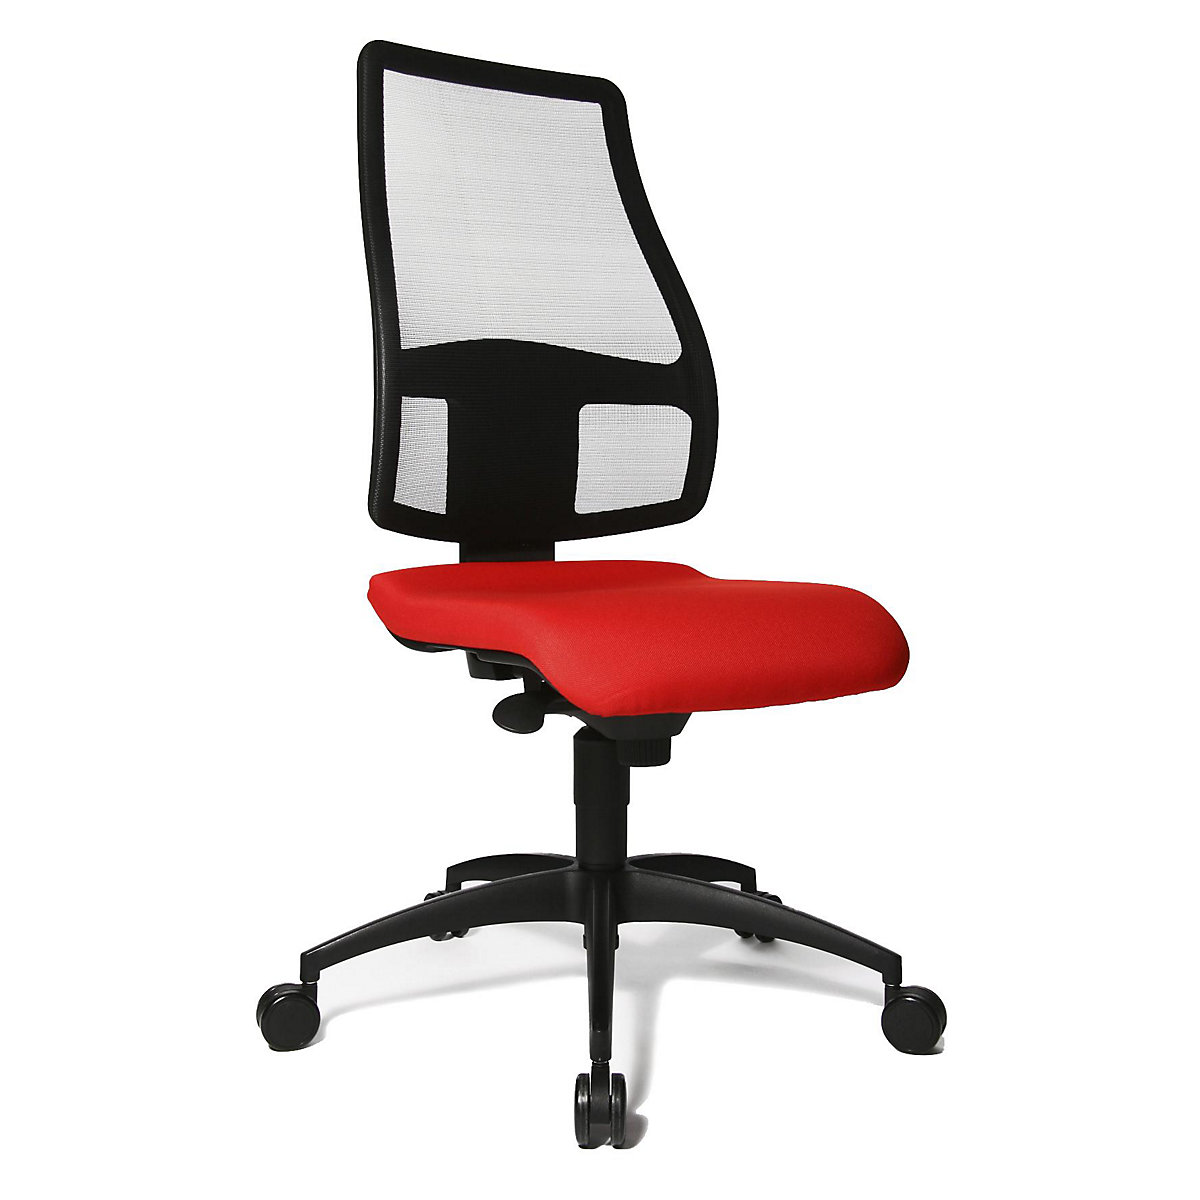 Ergonomic swivel chair, back rest height 680 mm – Topstar, back rest with actively breathing mesh covering, light red seat cover-4